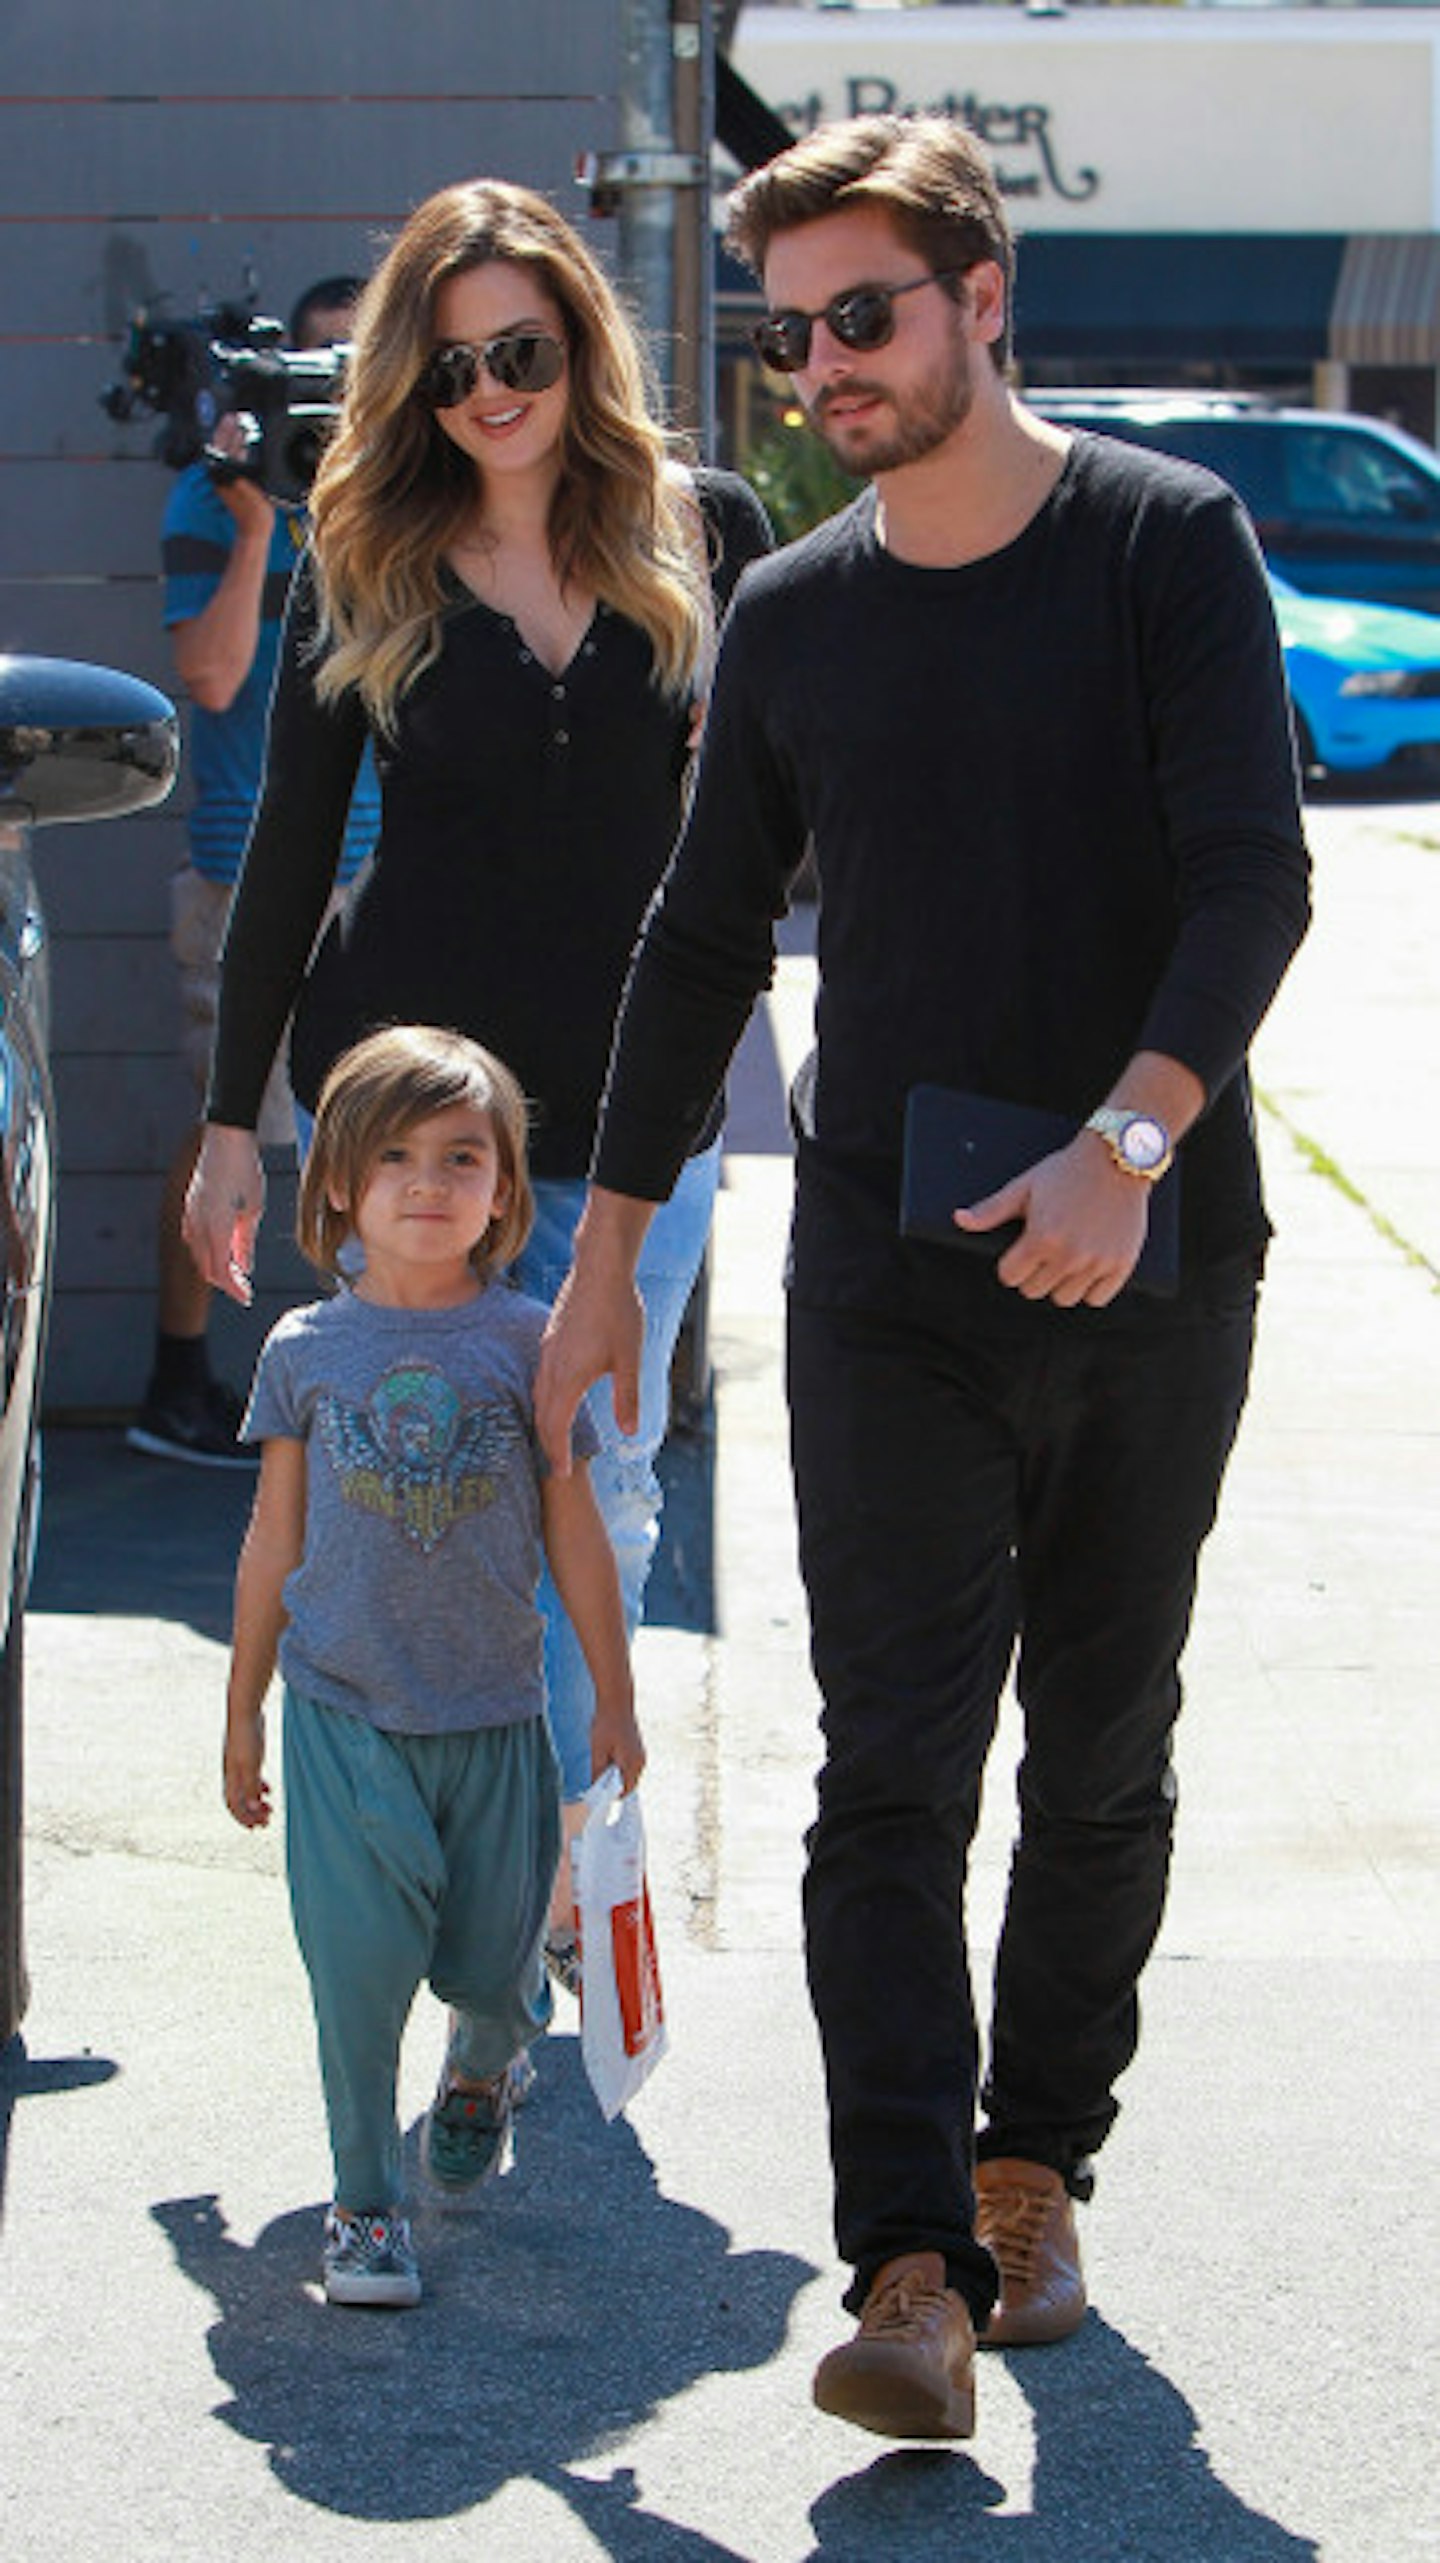 Khloe and Scott, pictured with Mason, are best friends